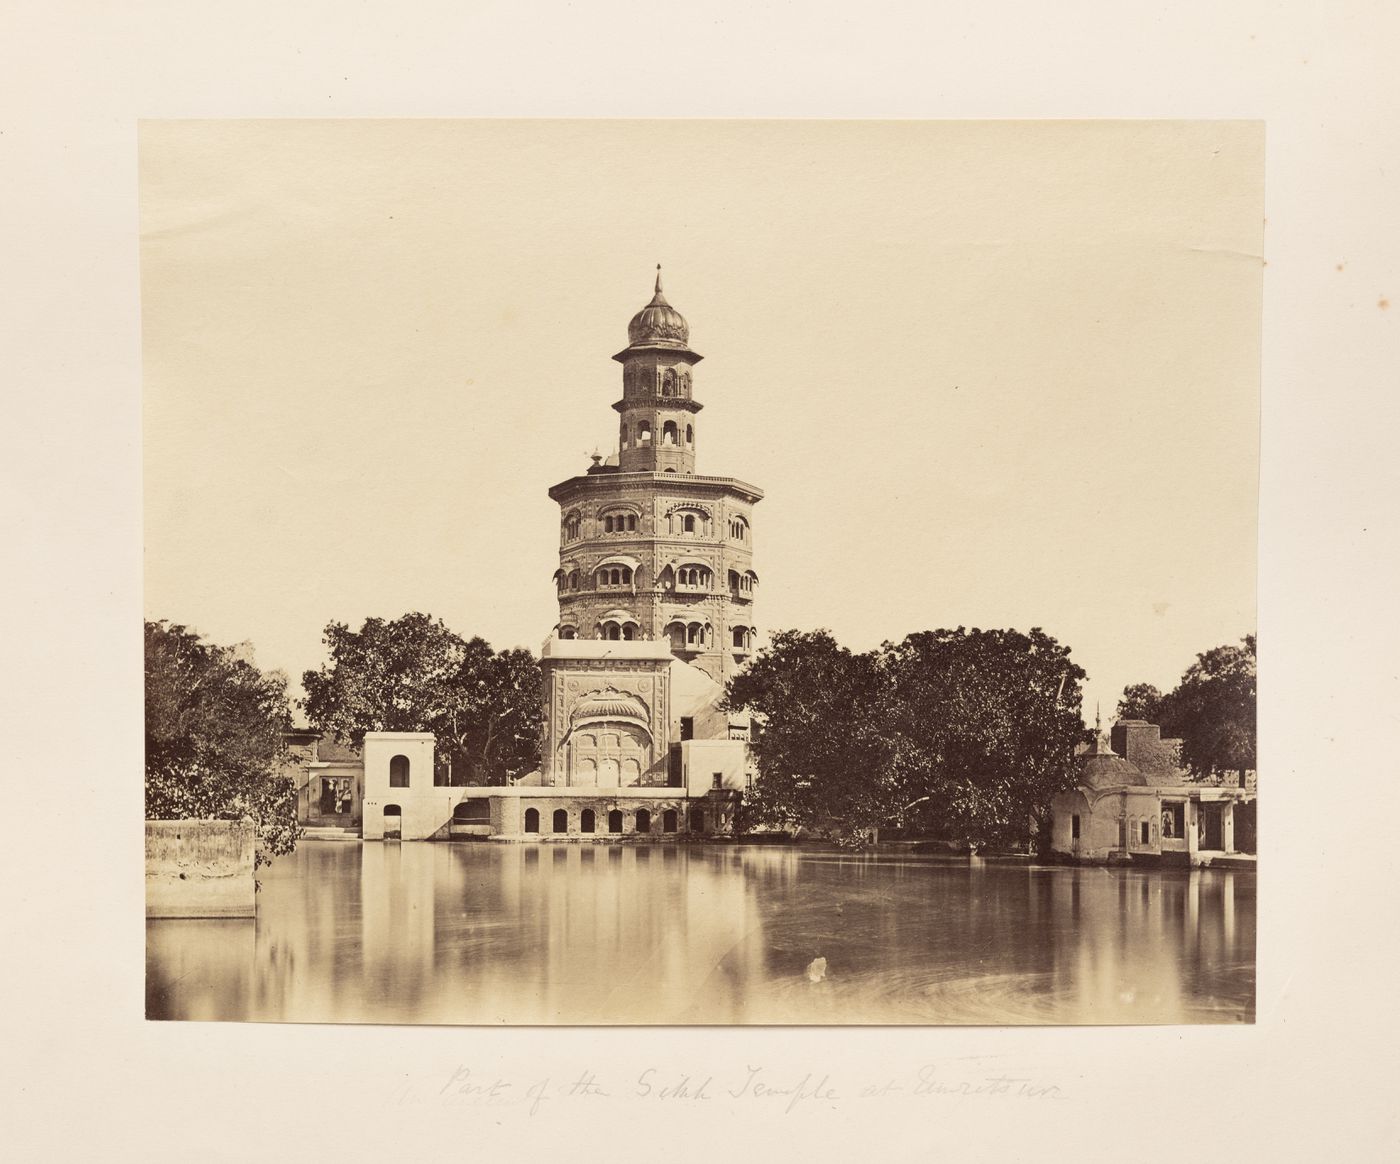 View of a minaret, possibly part of the Golden Temple, Amritsar, India